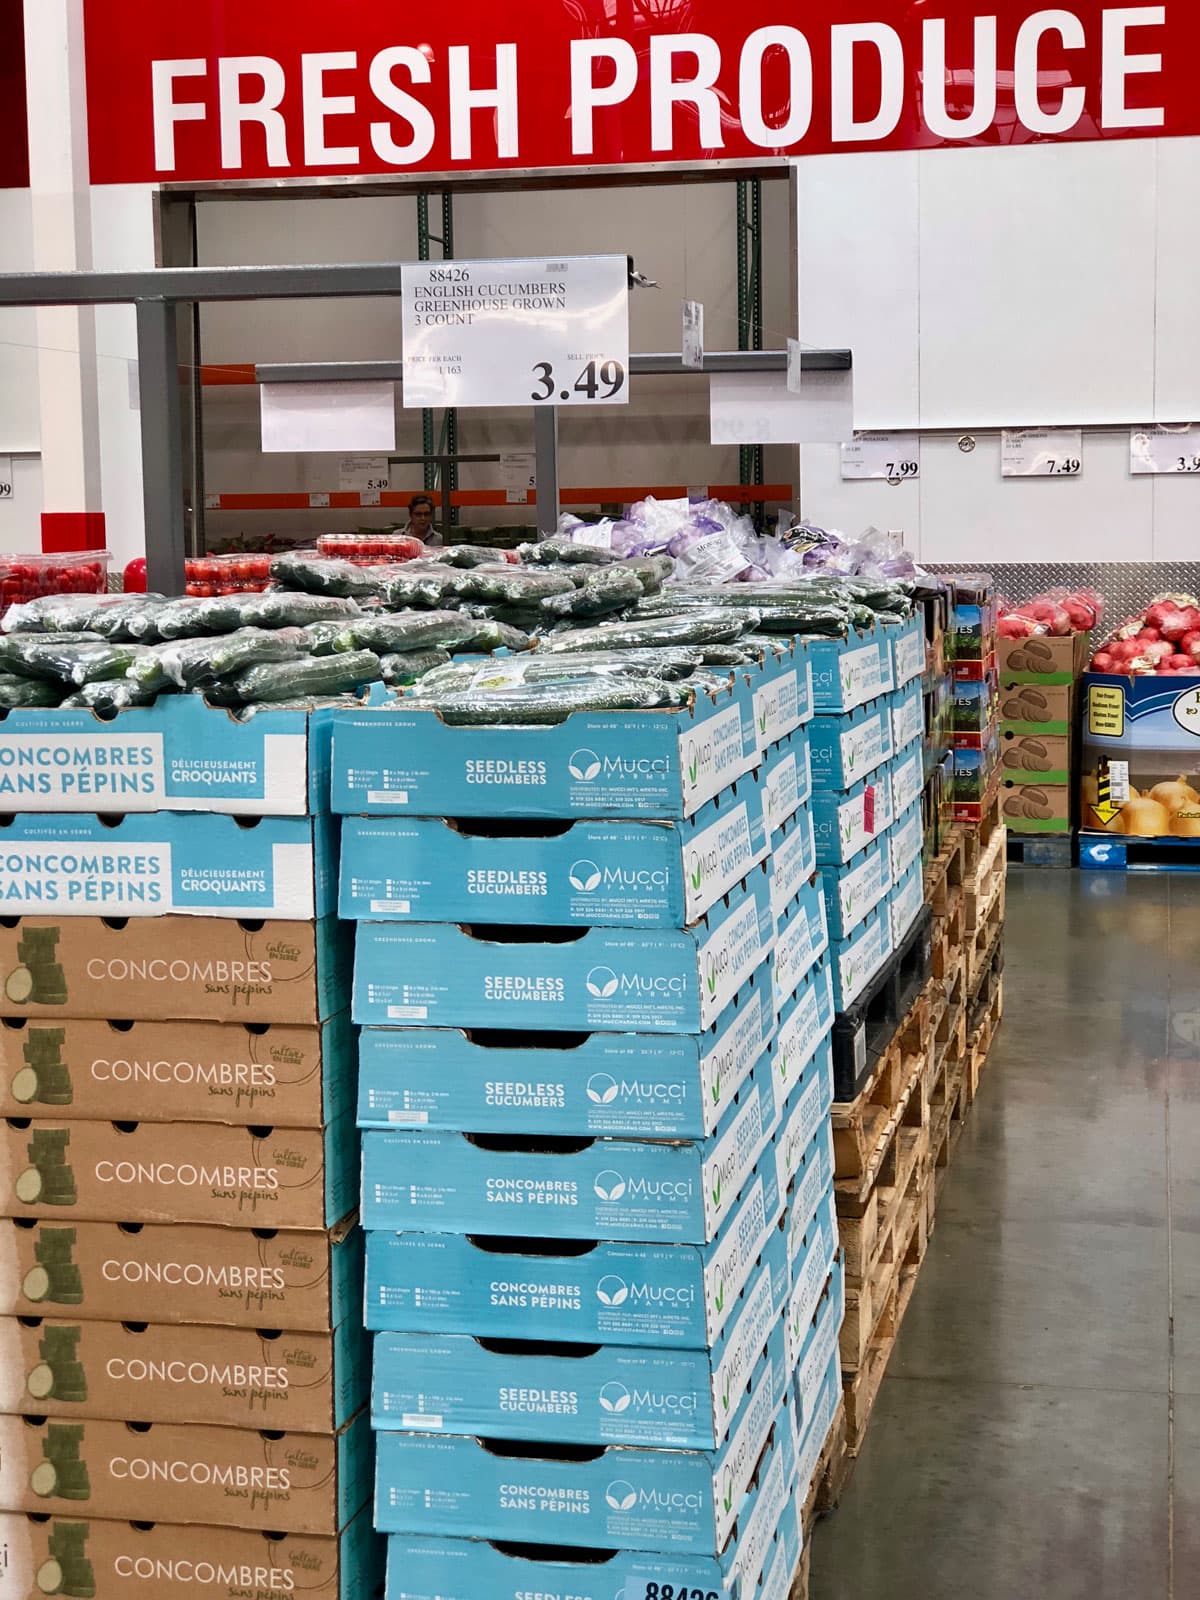 The 5 Biggest Lessons I Learned During My First Year as a Costco Member